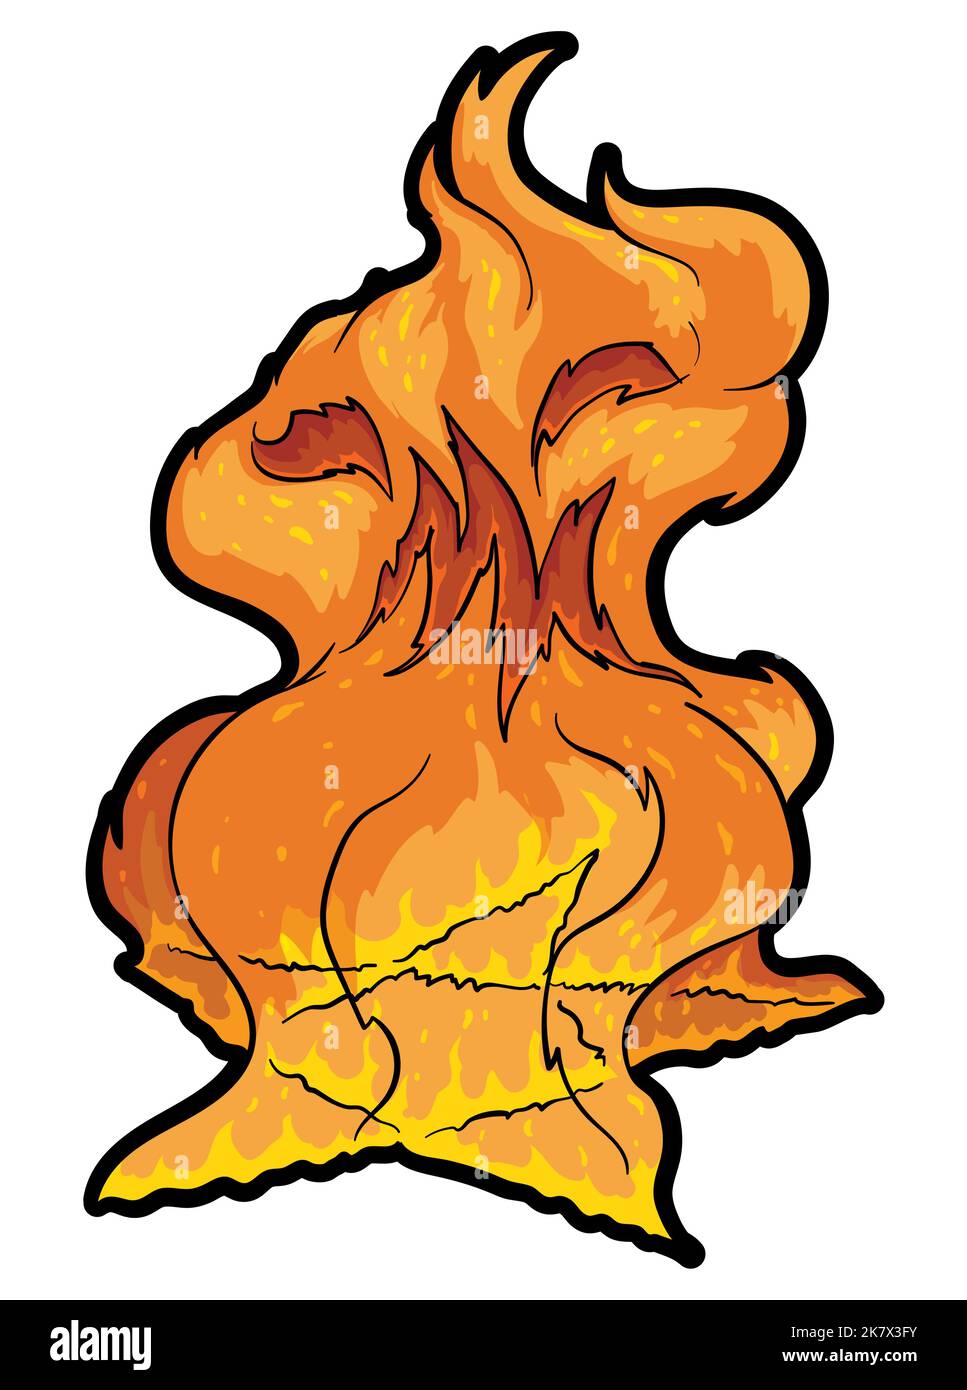 Magic spell with a fierce flame coming out of a pentagram invoking a dangerous spirit. Stock Vector